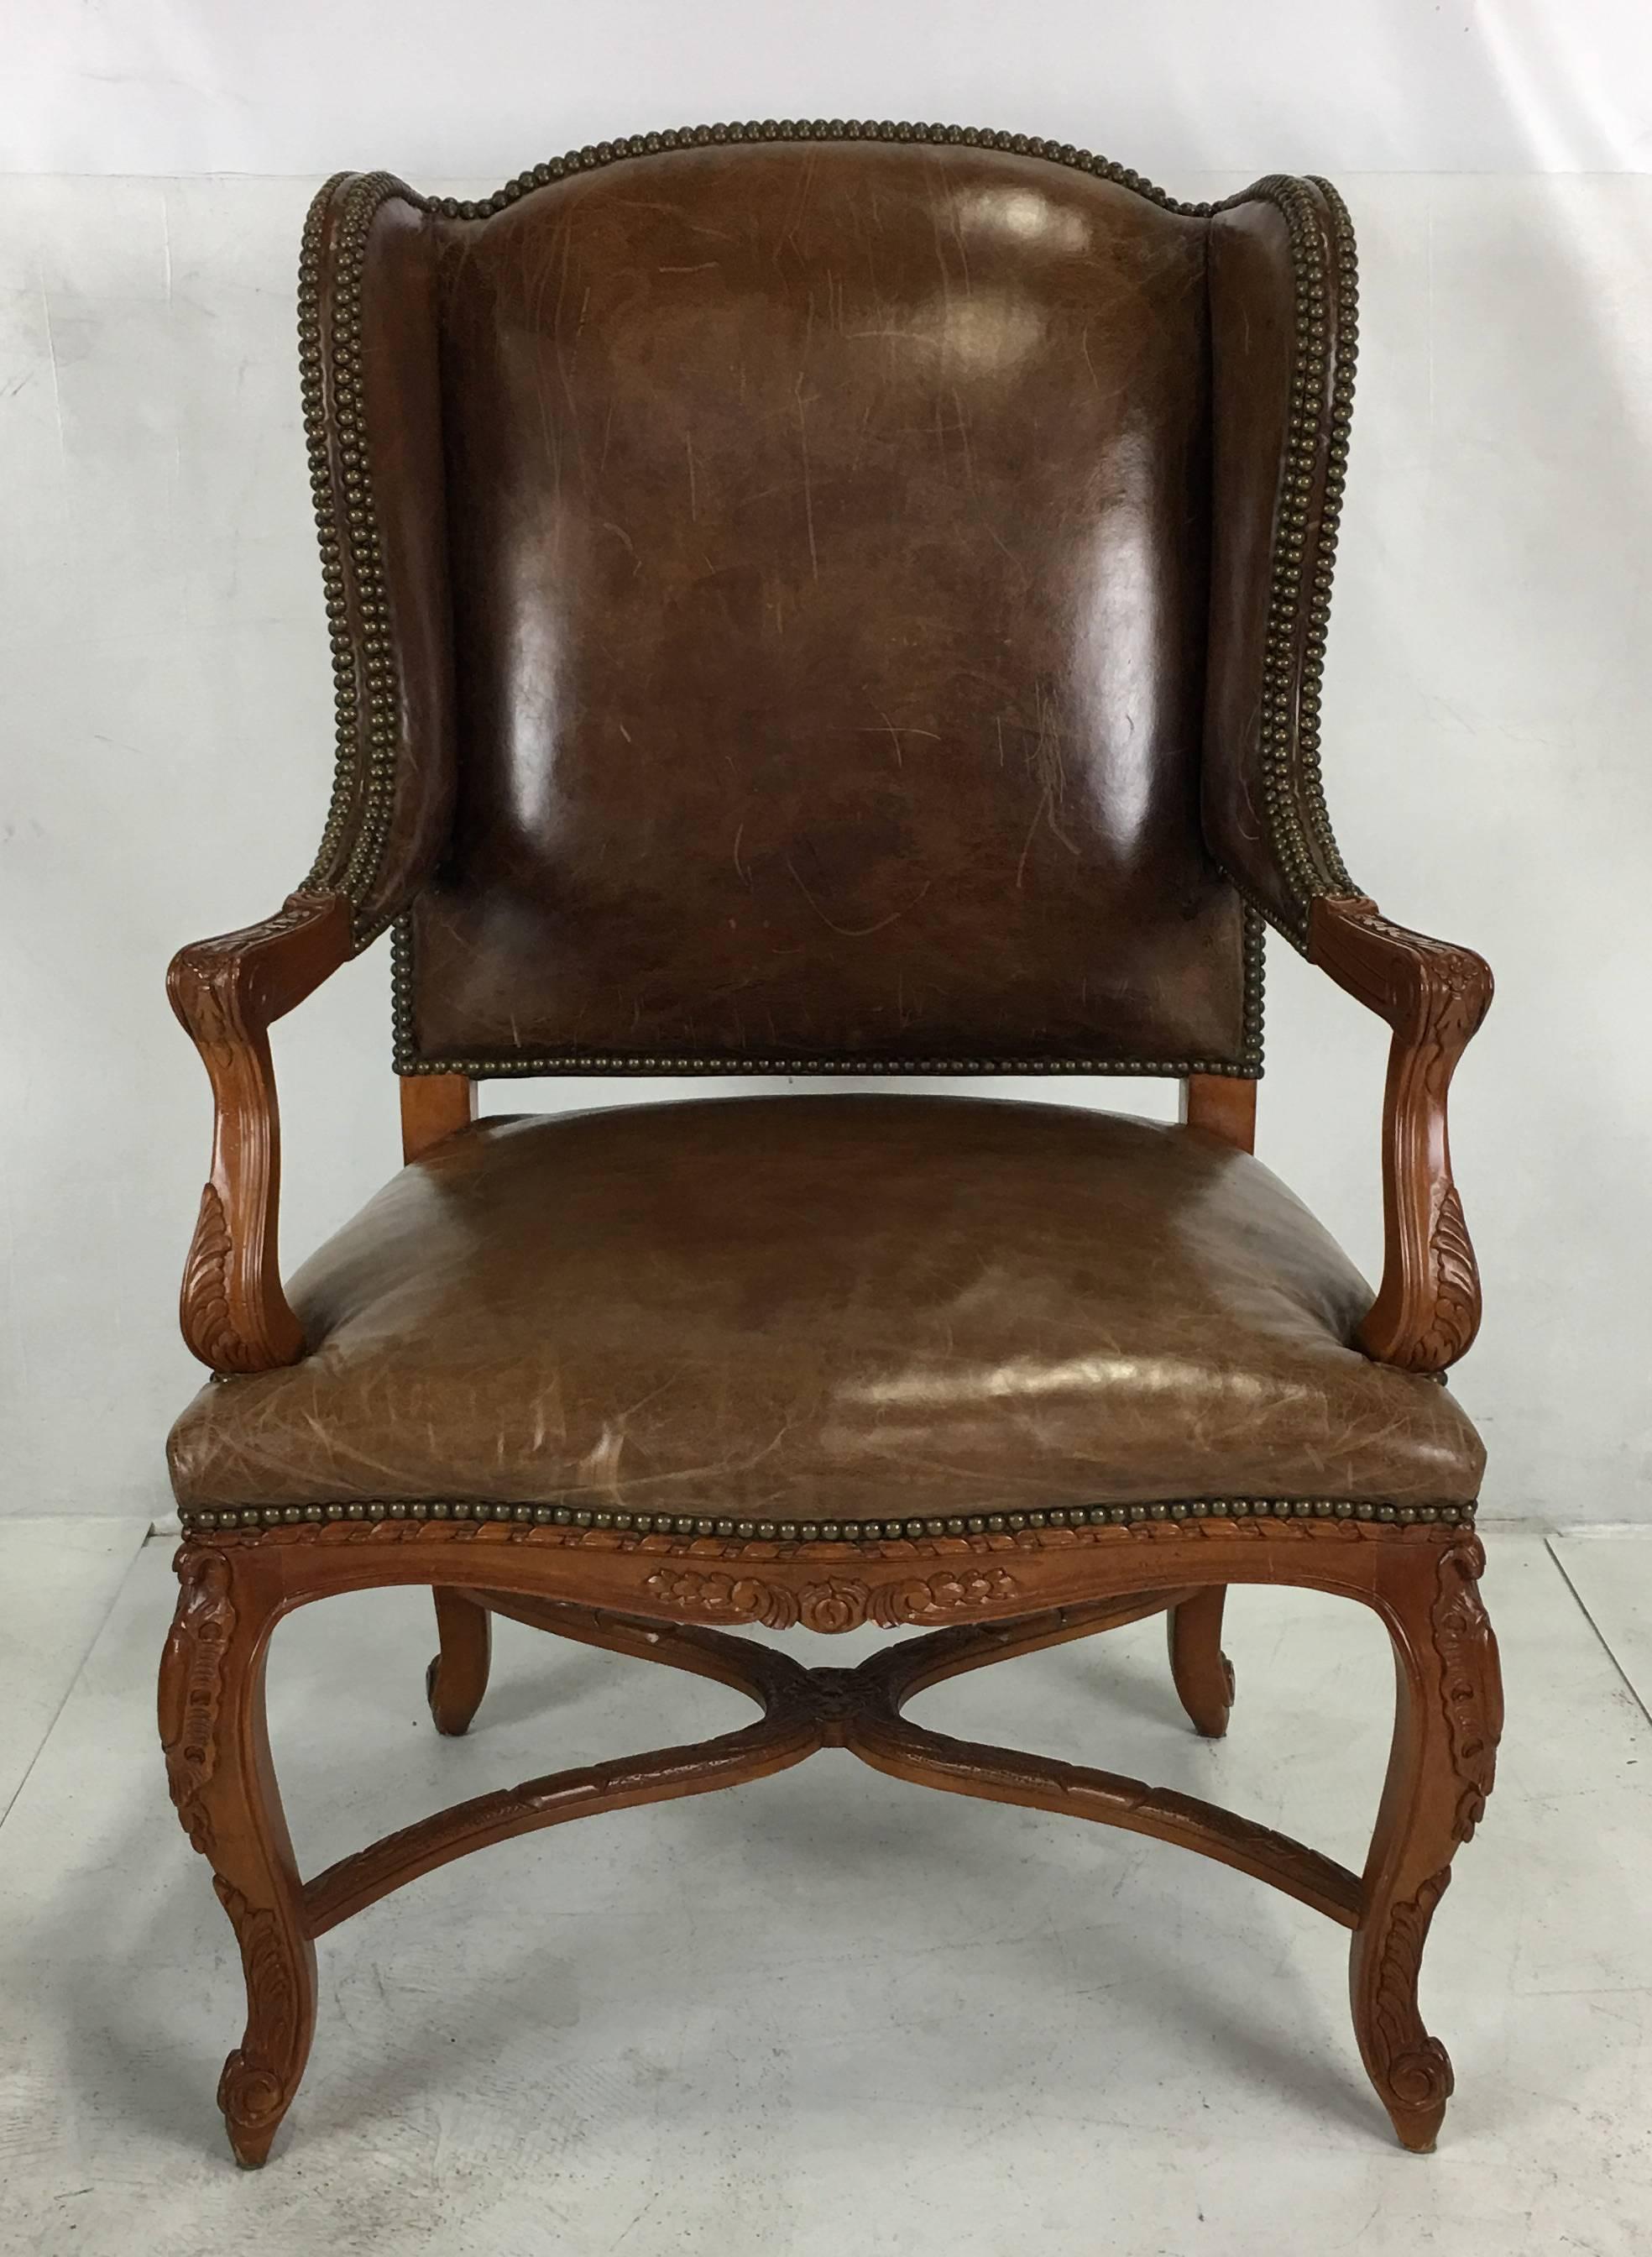 Wonderful Ralph Lauren Spencer wing chair upholstered in natural saddle leather. The frame is in perfect condition and the leather is beautifully worn. This versatile chair would work well as a desk chair or living room occasional chair.